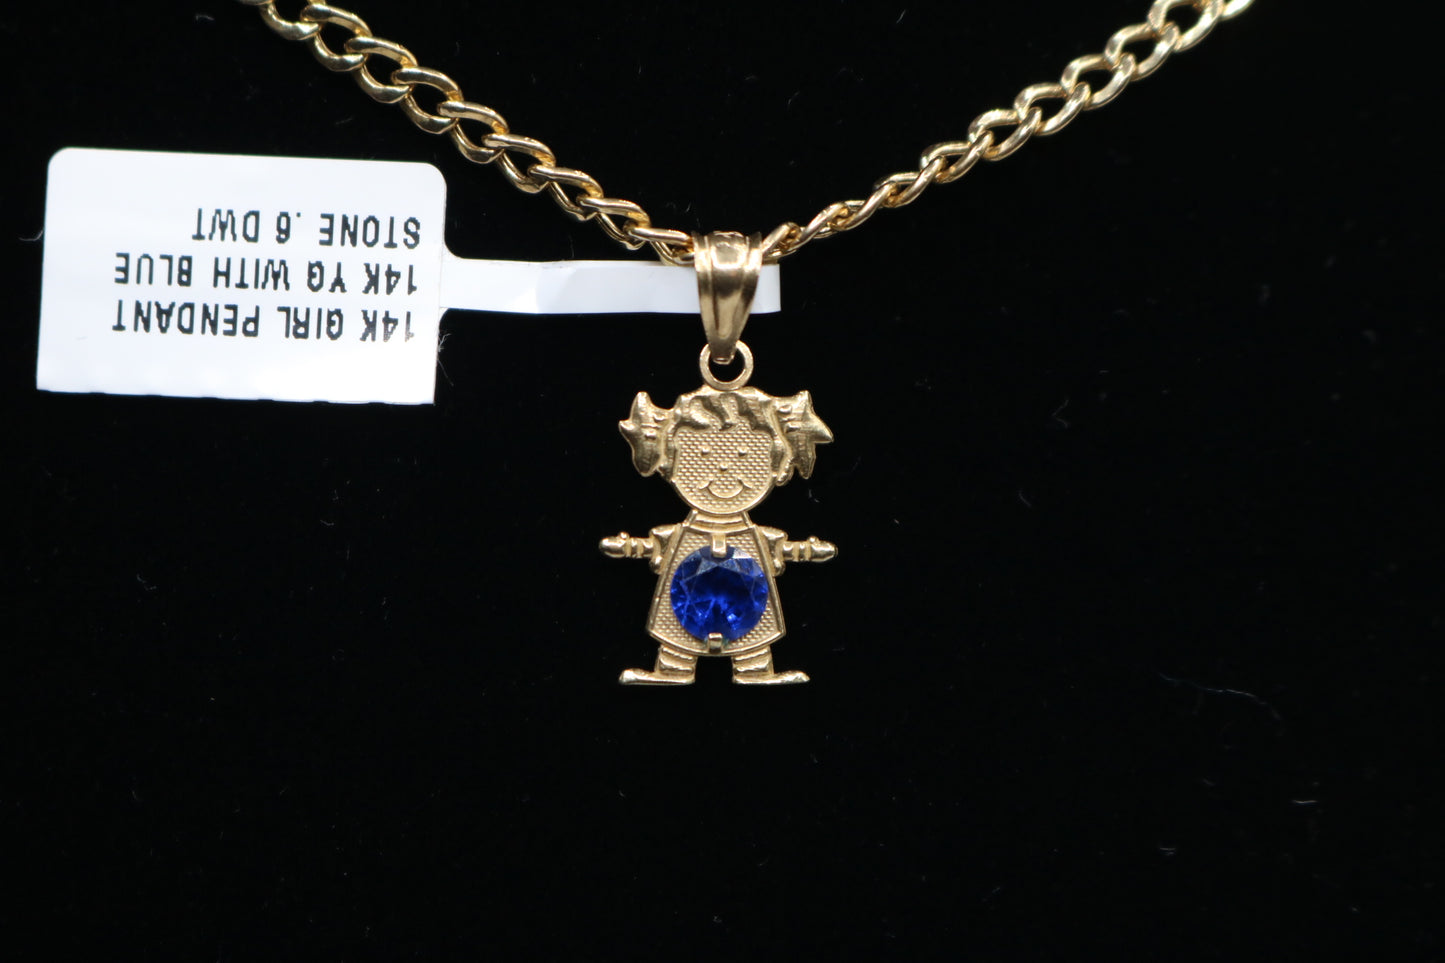 14K Yellow Gold Girl Charm with Blue Stone